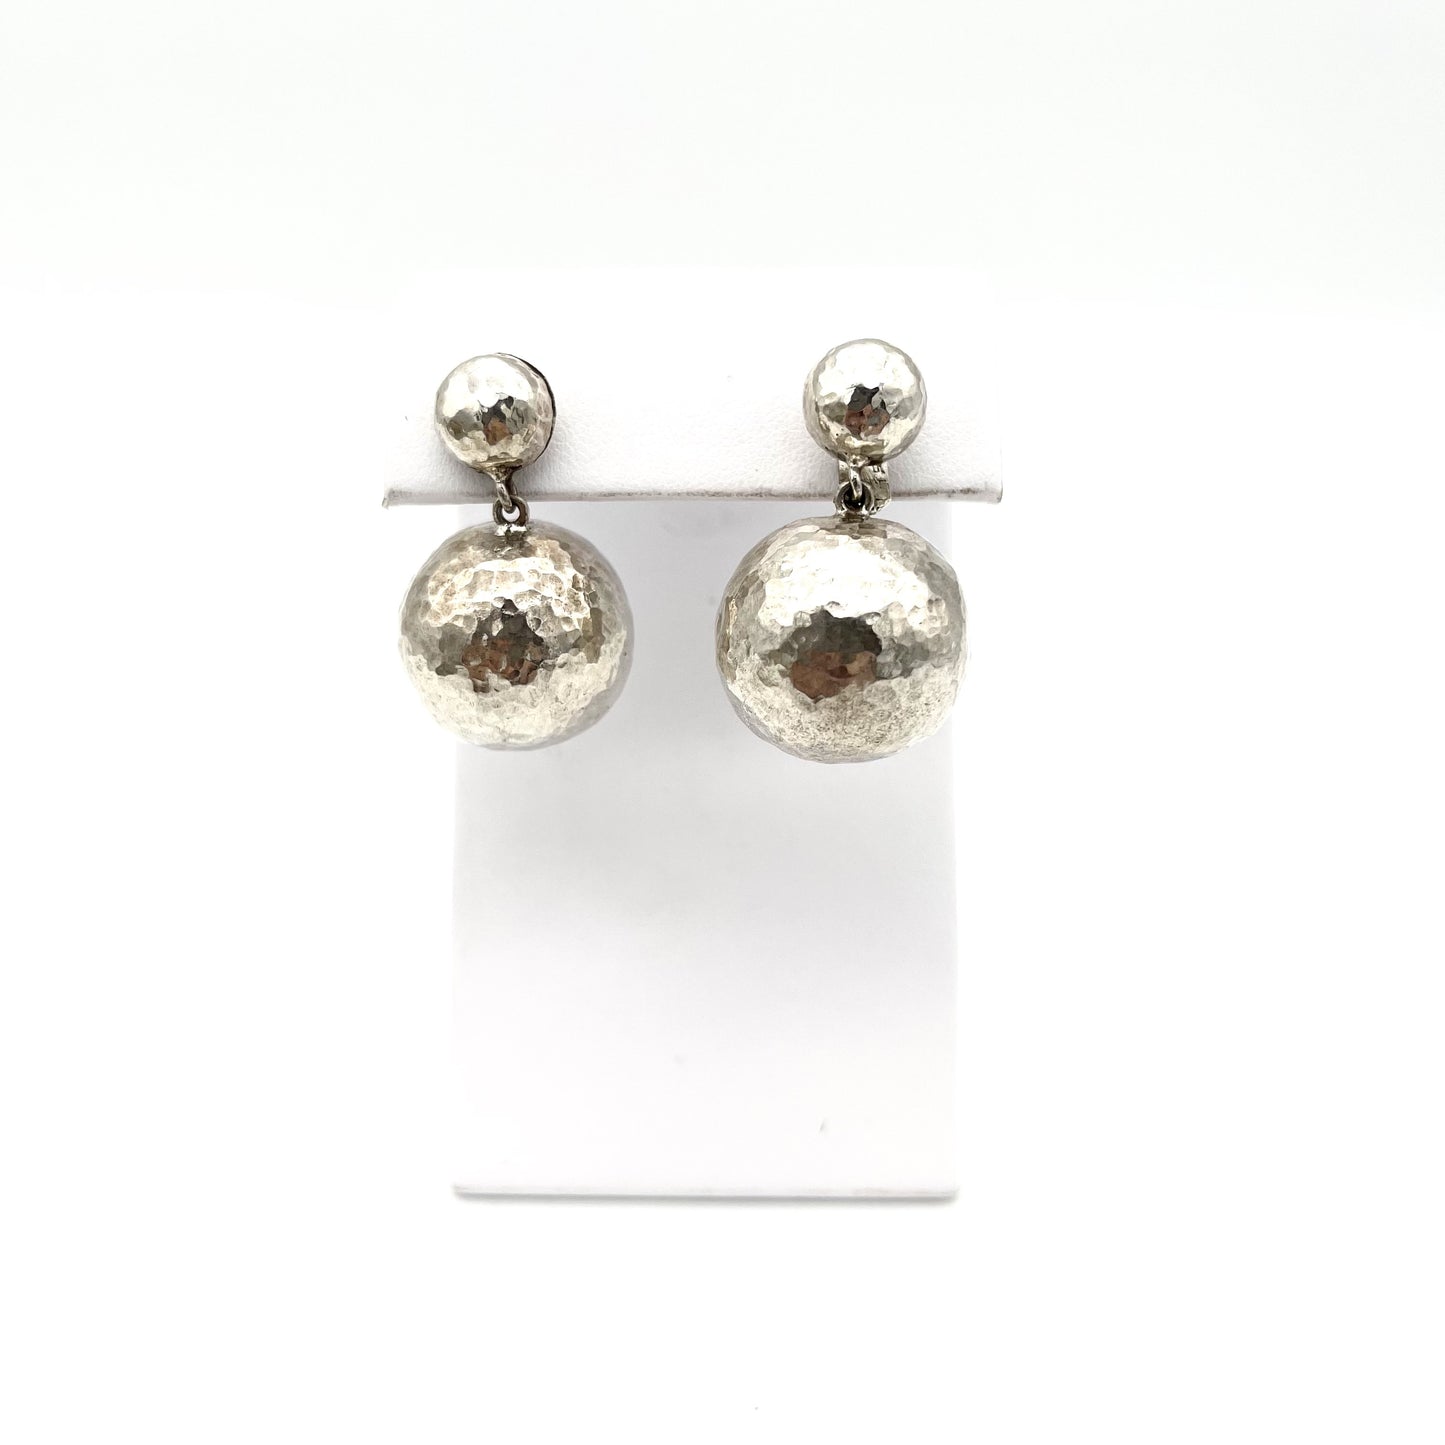 Pat Areias Sterling Silver Hammered Ball Earrings E926